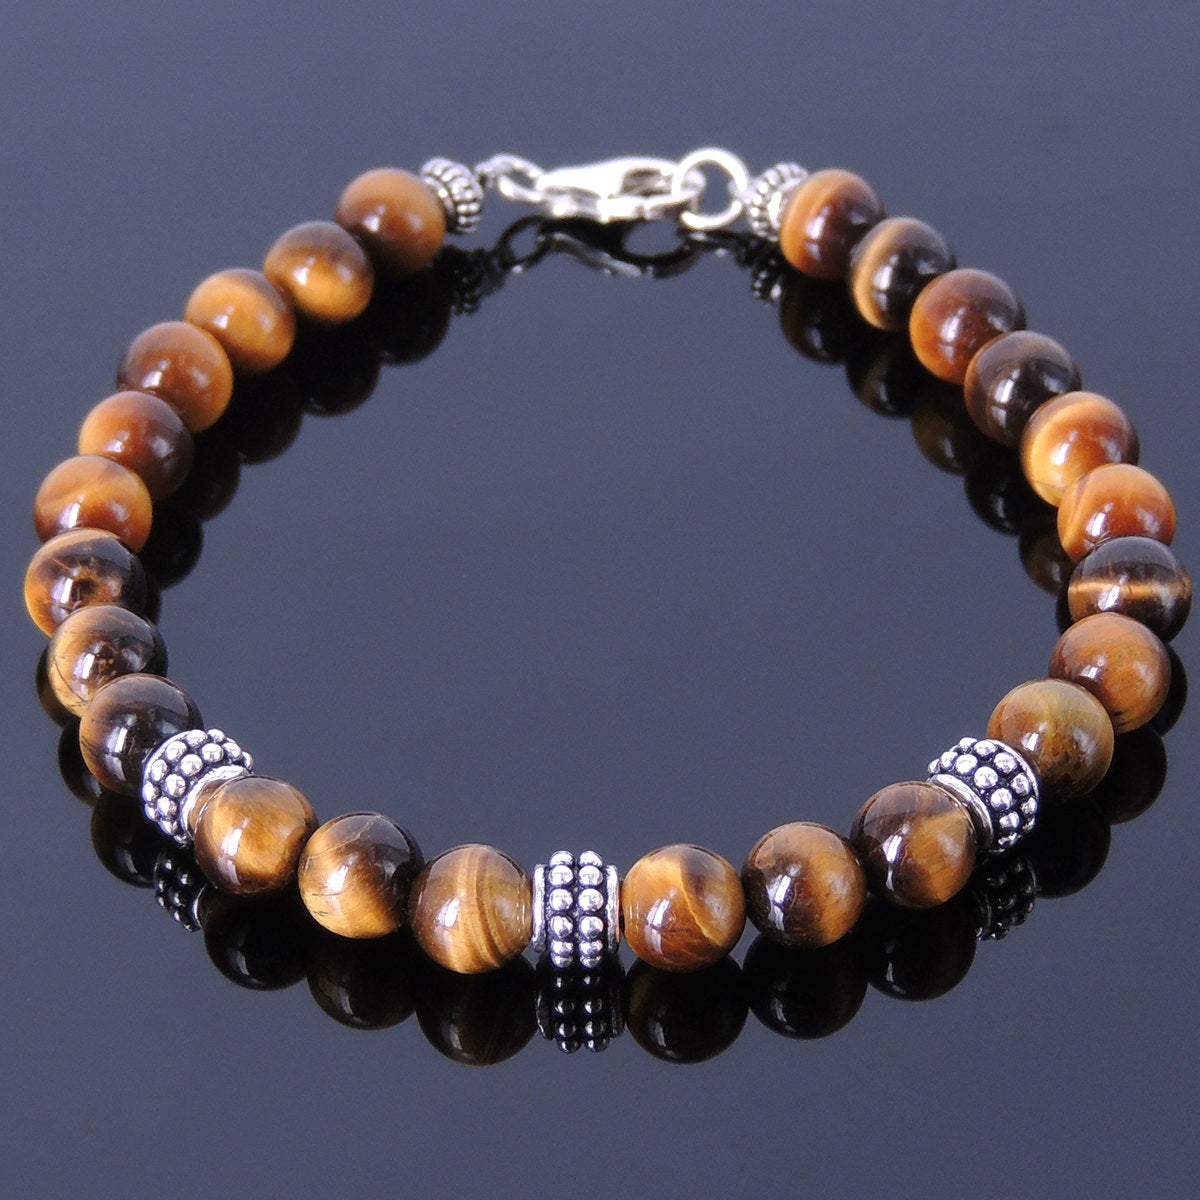 6mm Brown Tiger Eye Healing Stone Bracelet with S925 Sterling Silver Artisan Spacer Beads & Clasp - Handmade by Gem & Silver BR368